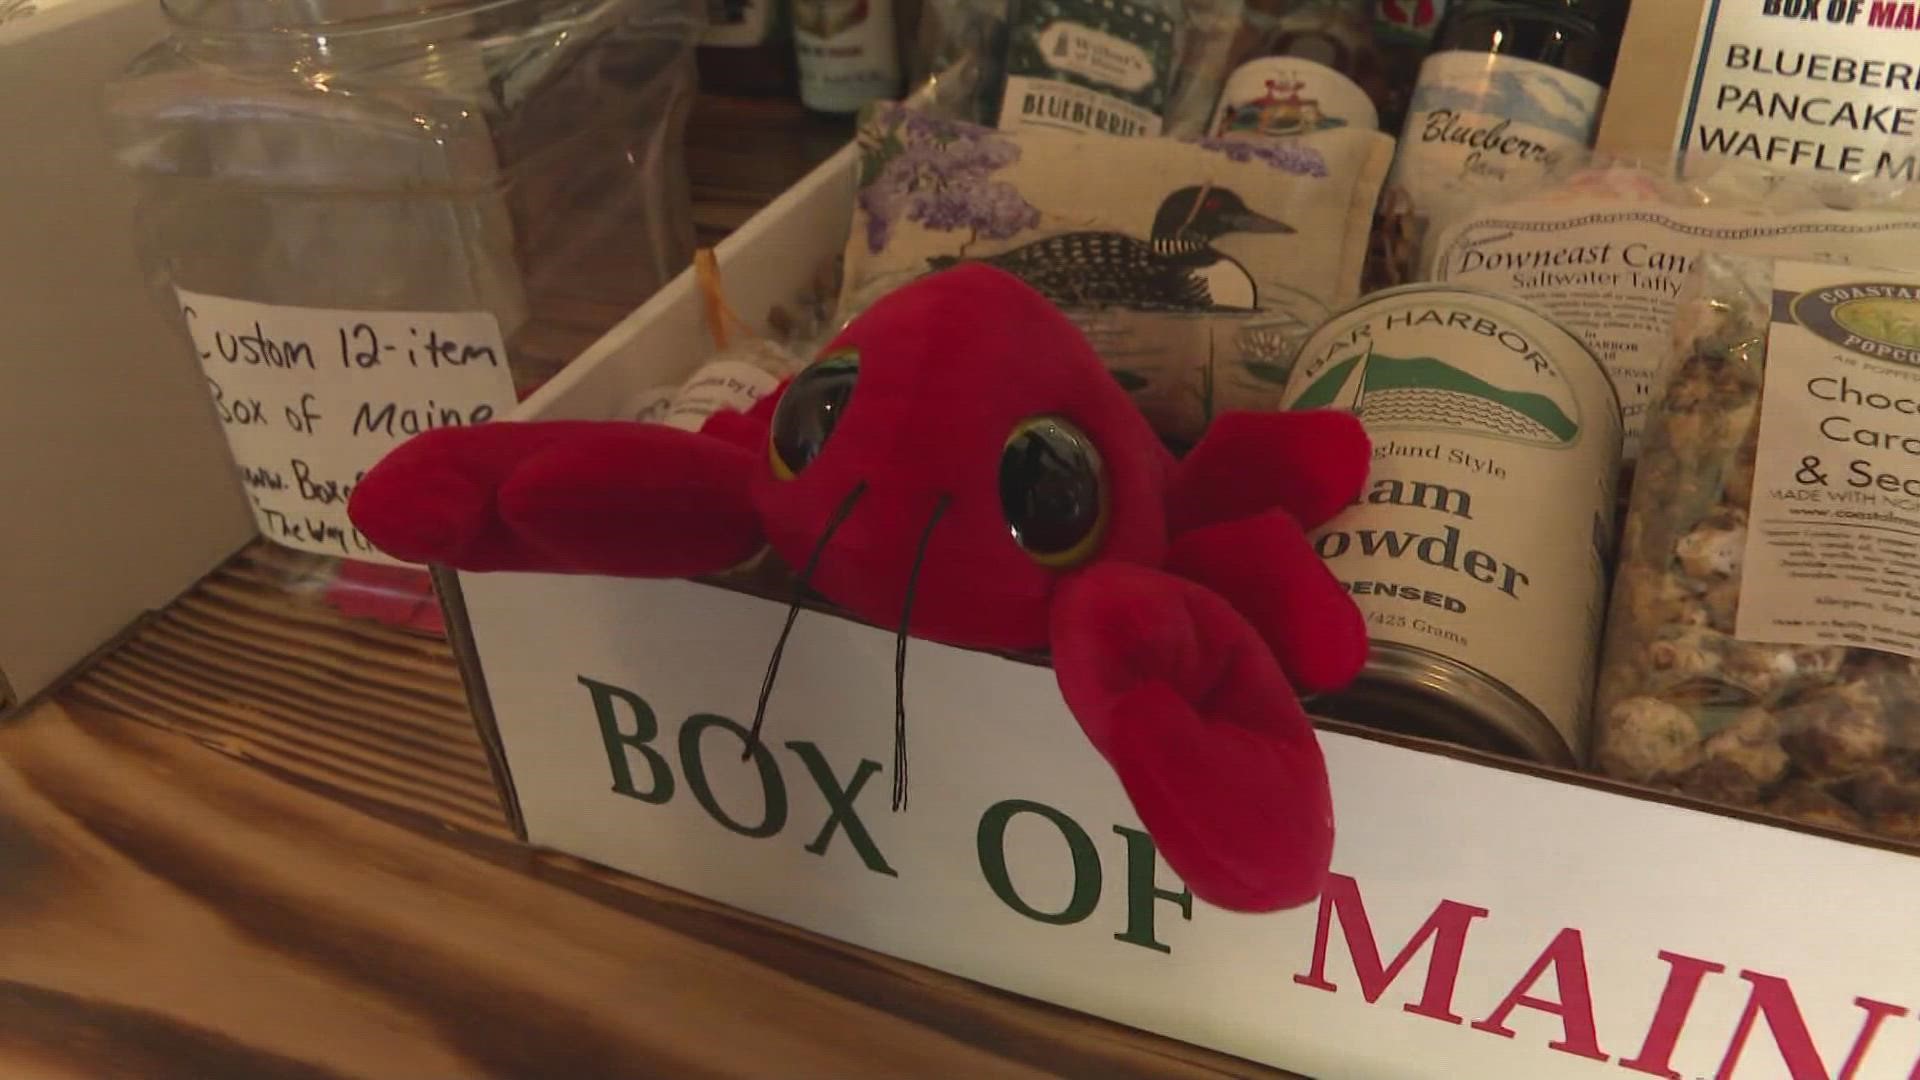 Local Maine-themed gift box business held a special ceremony Tuesday to celebrate their hard work and love for Maine.